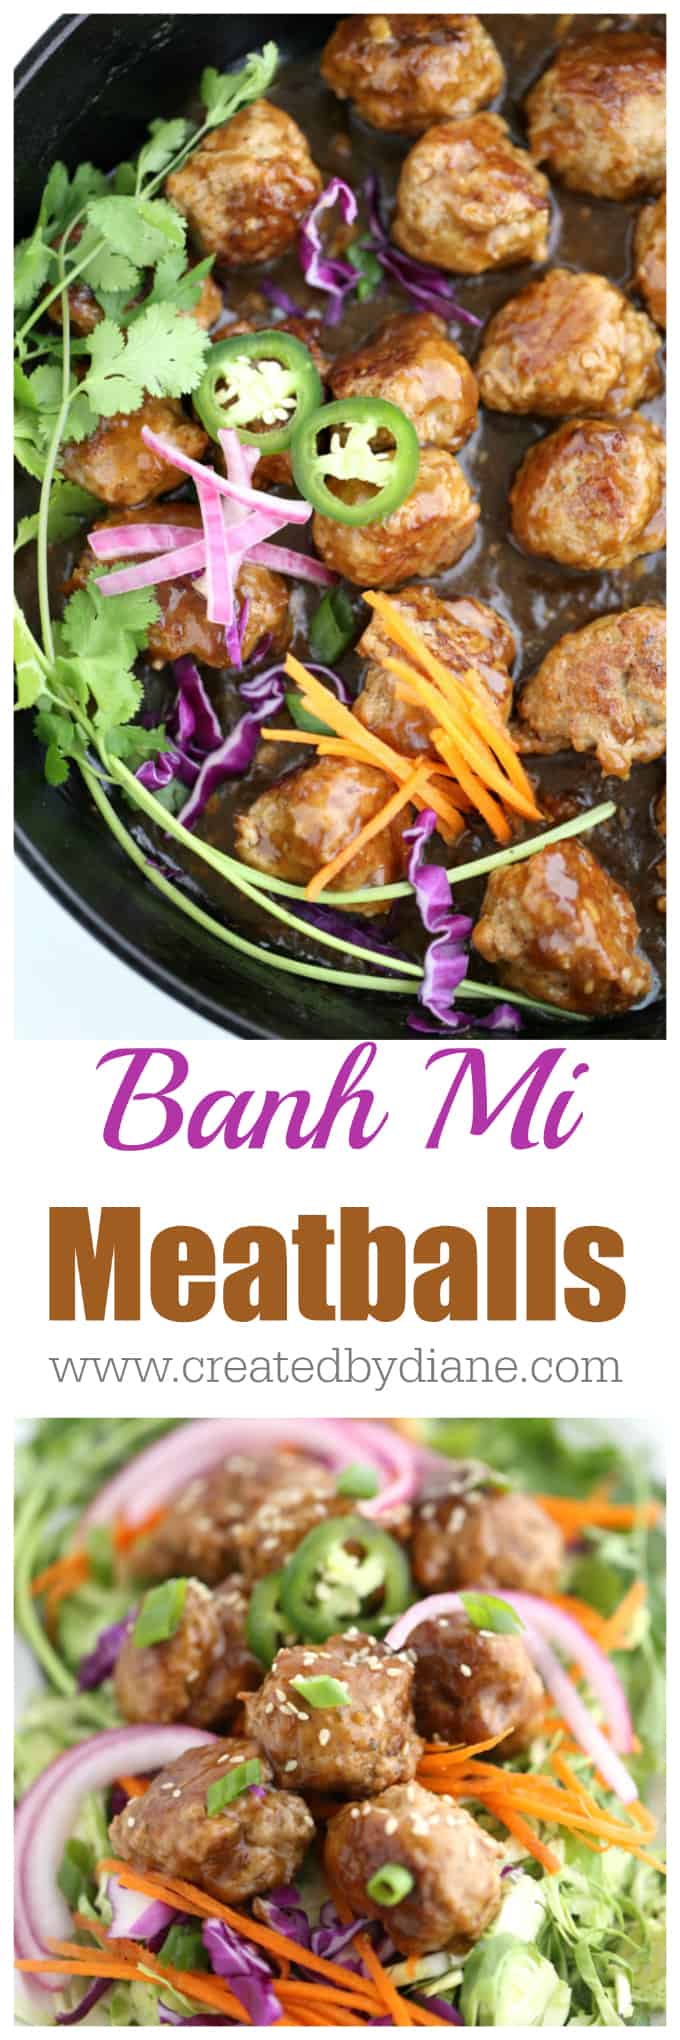 easy Banh Mi Meatball recipe better than take out and ready in under 30 minutes www.createdbydiane.com